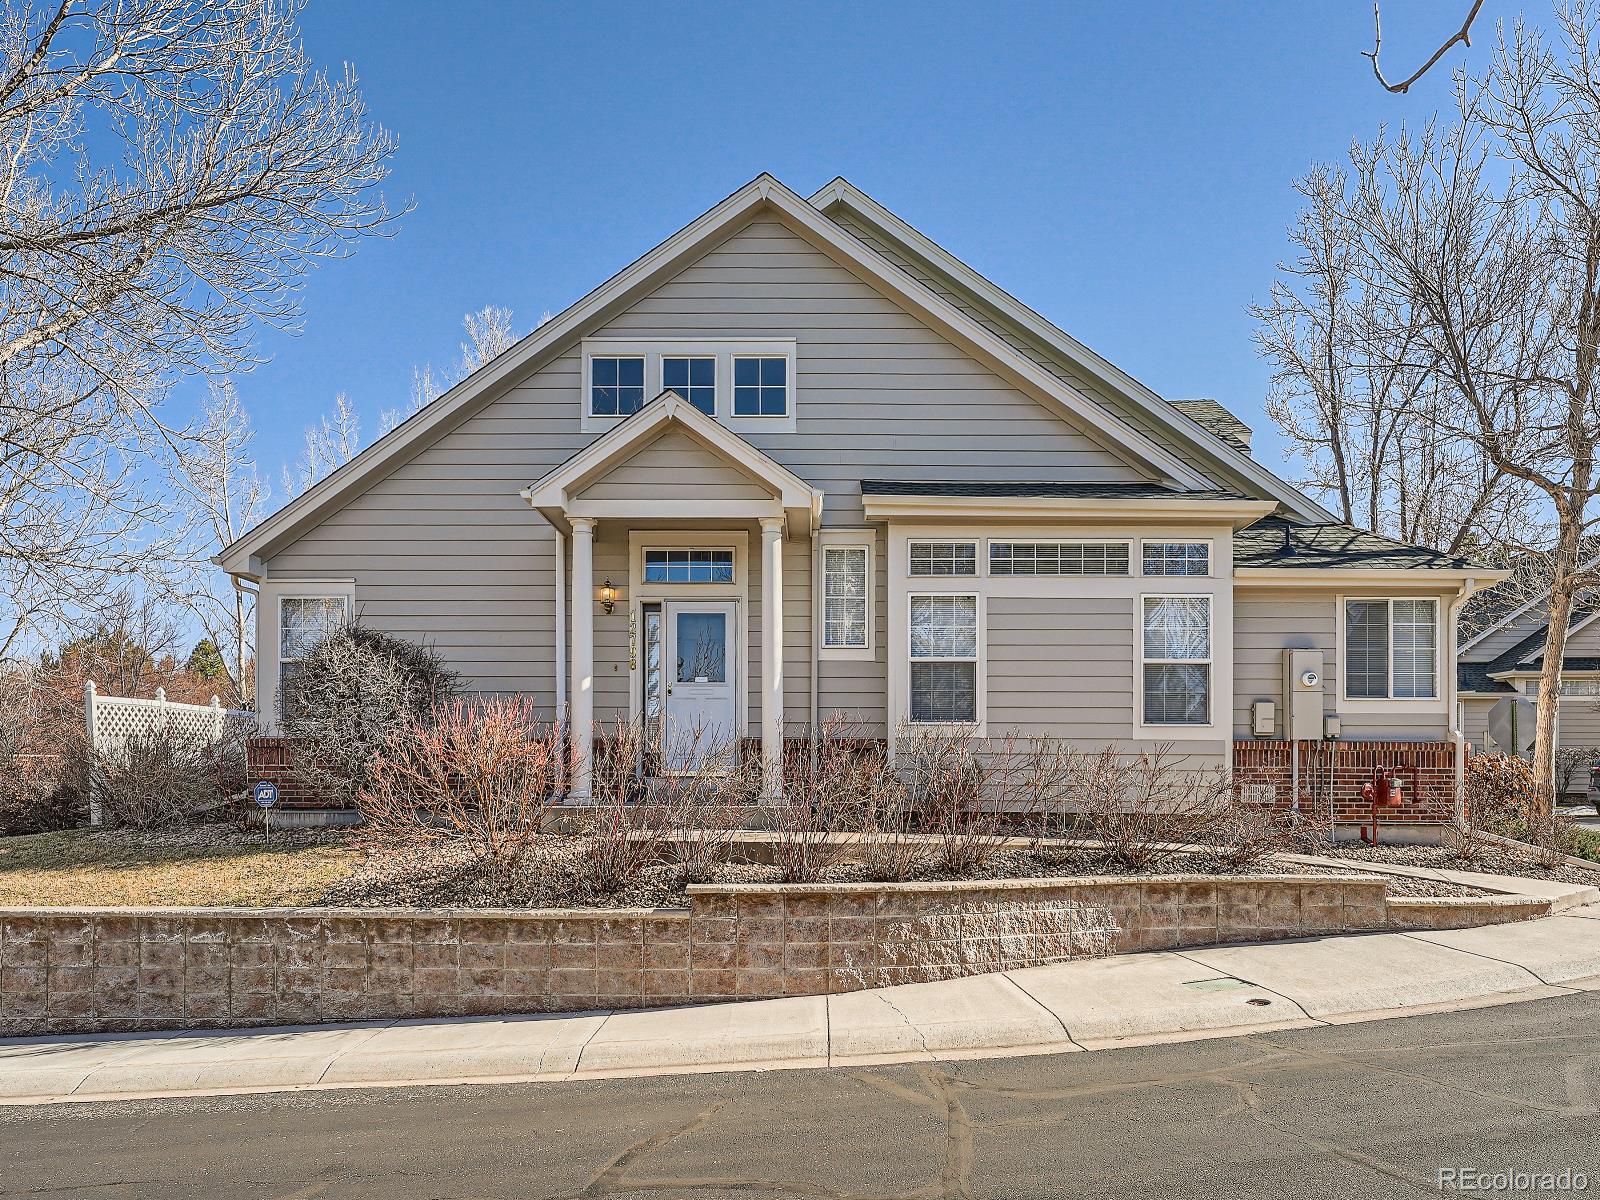 12798 e harvard circle, aurora sold home. Closed on 2024-04-19 for $485,000.